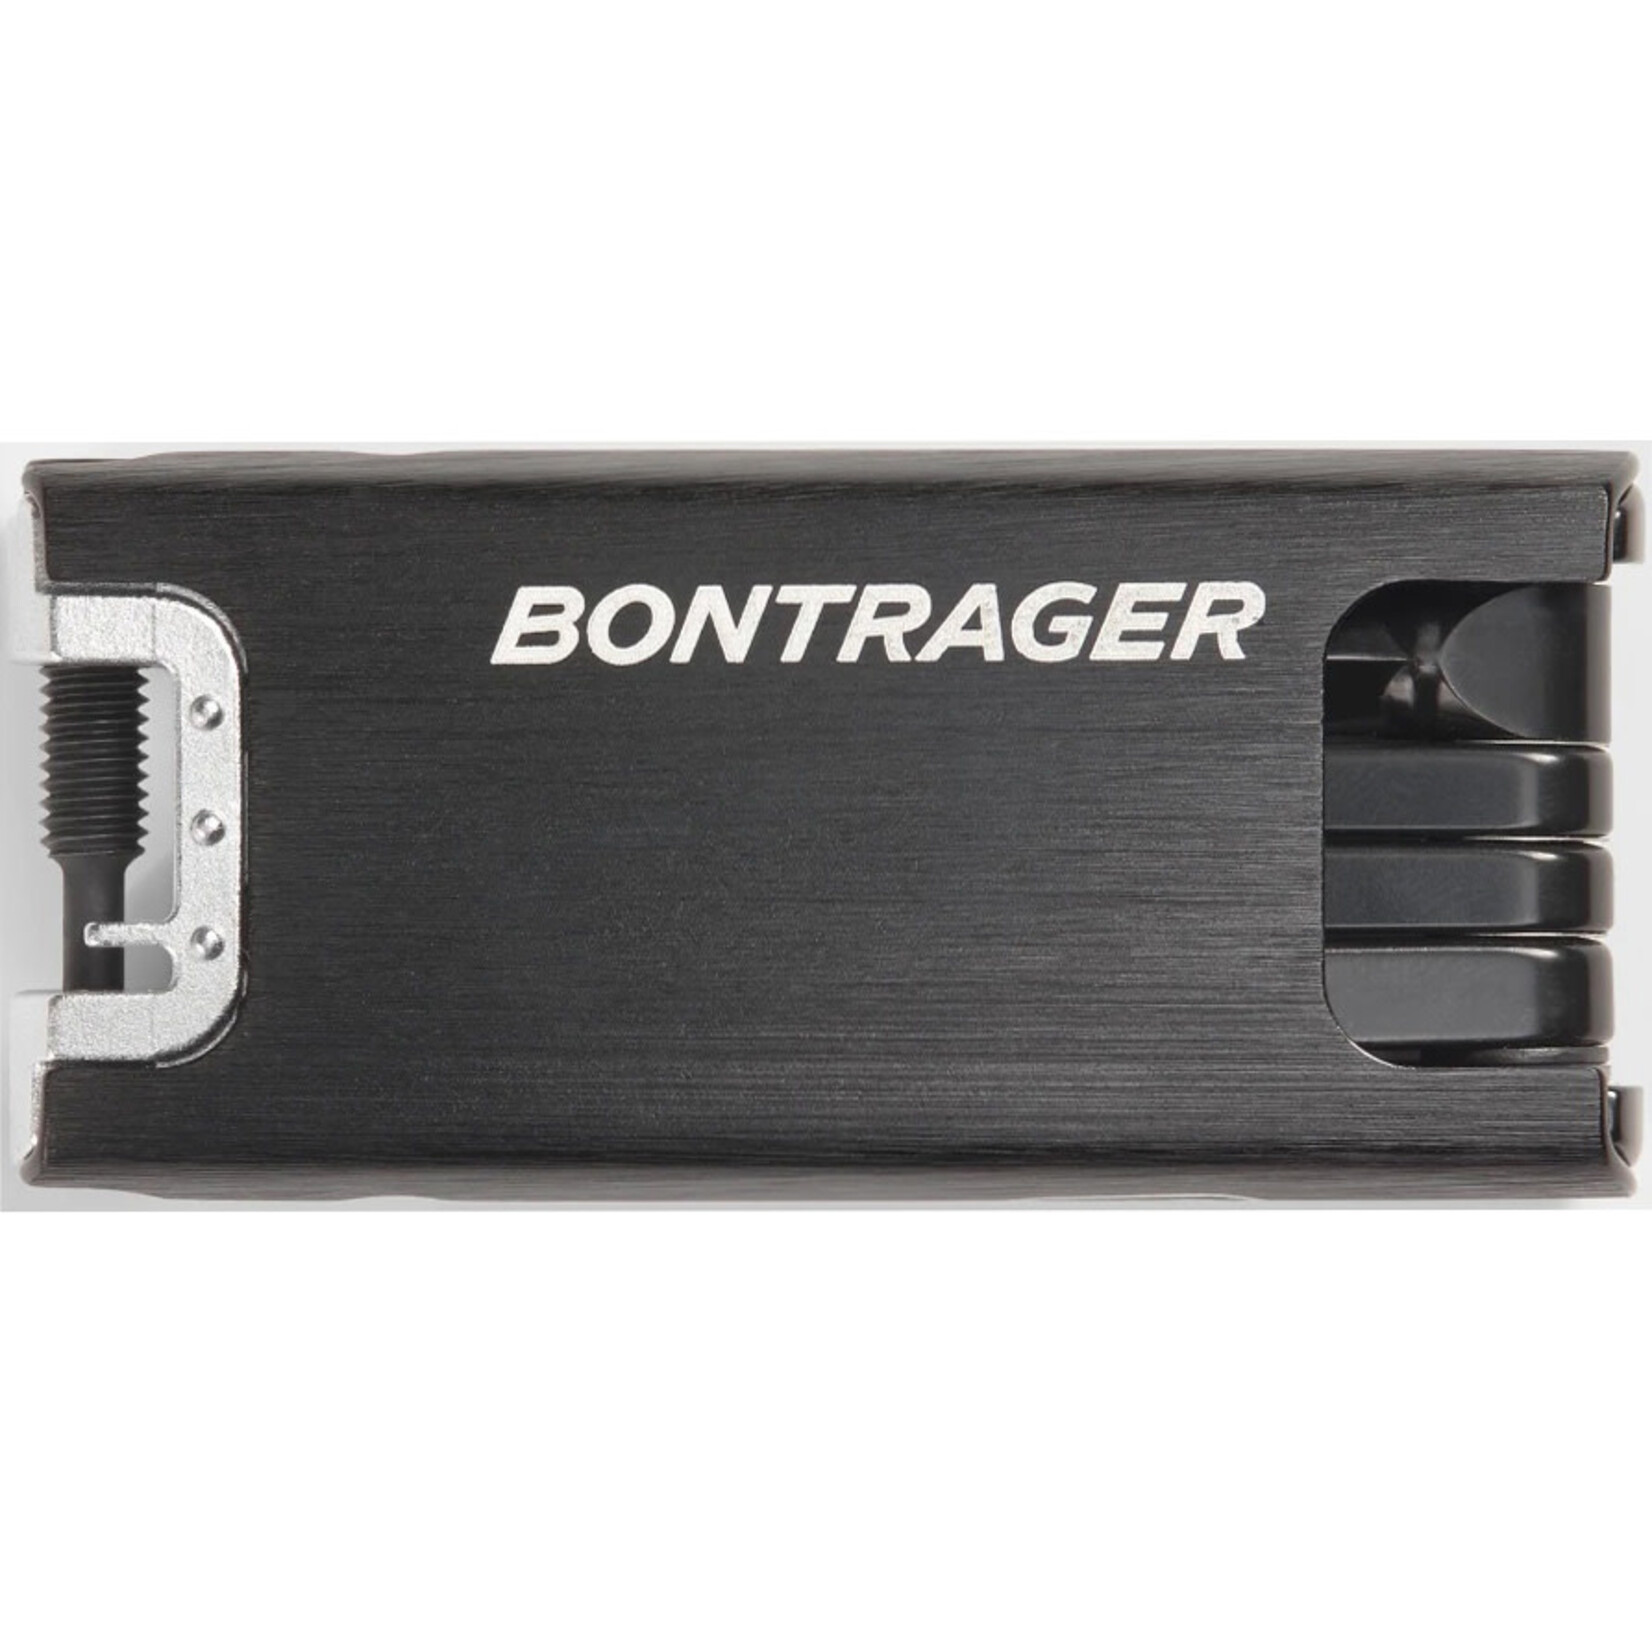 BONTRAGER Bontrager Pro Multi-Tool w/ Case and Chain Tool